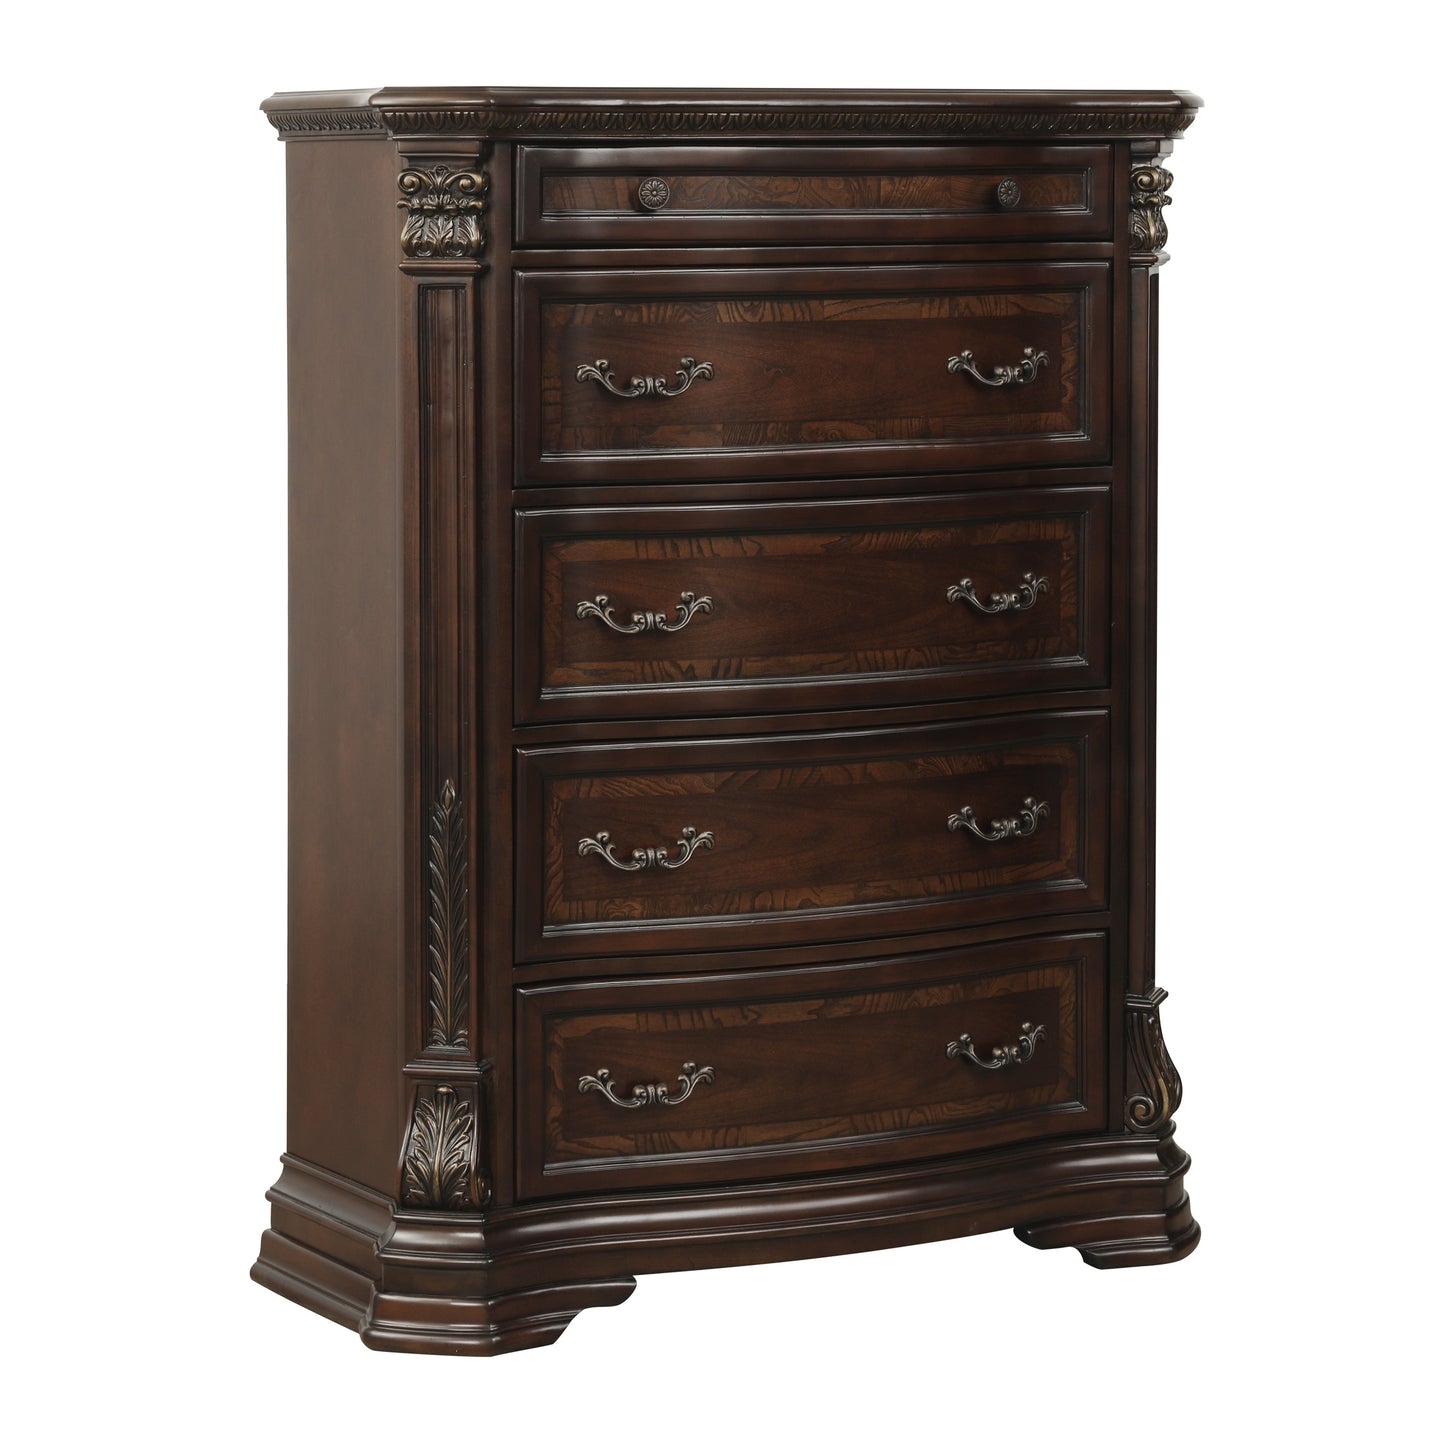 Homlegance Chest Antoinetta Collection In Warm Cherry Finish With Gold Tipping